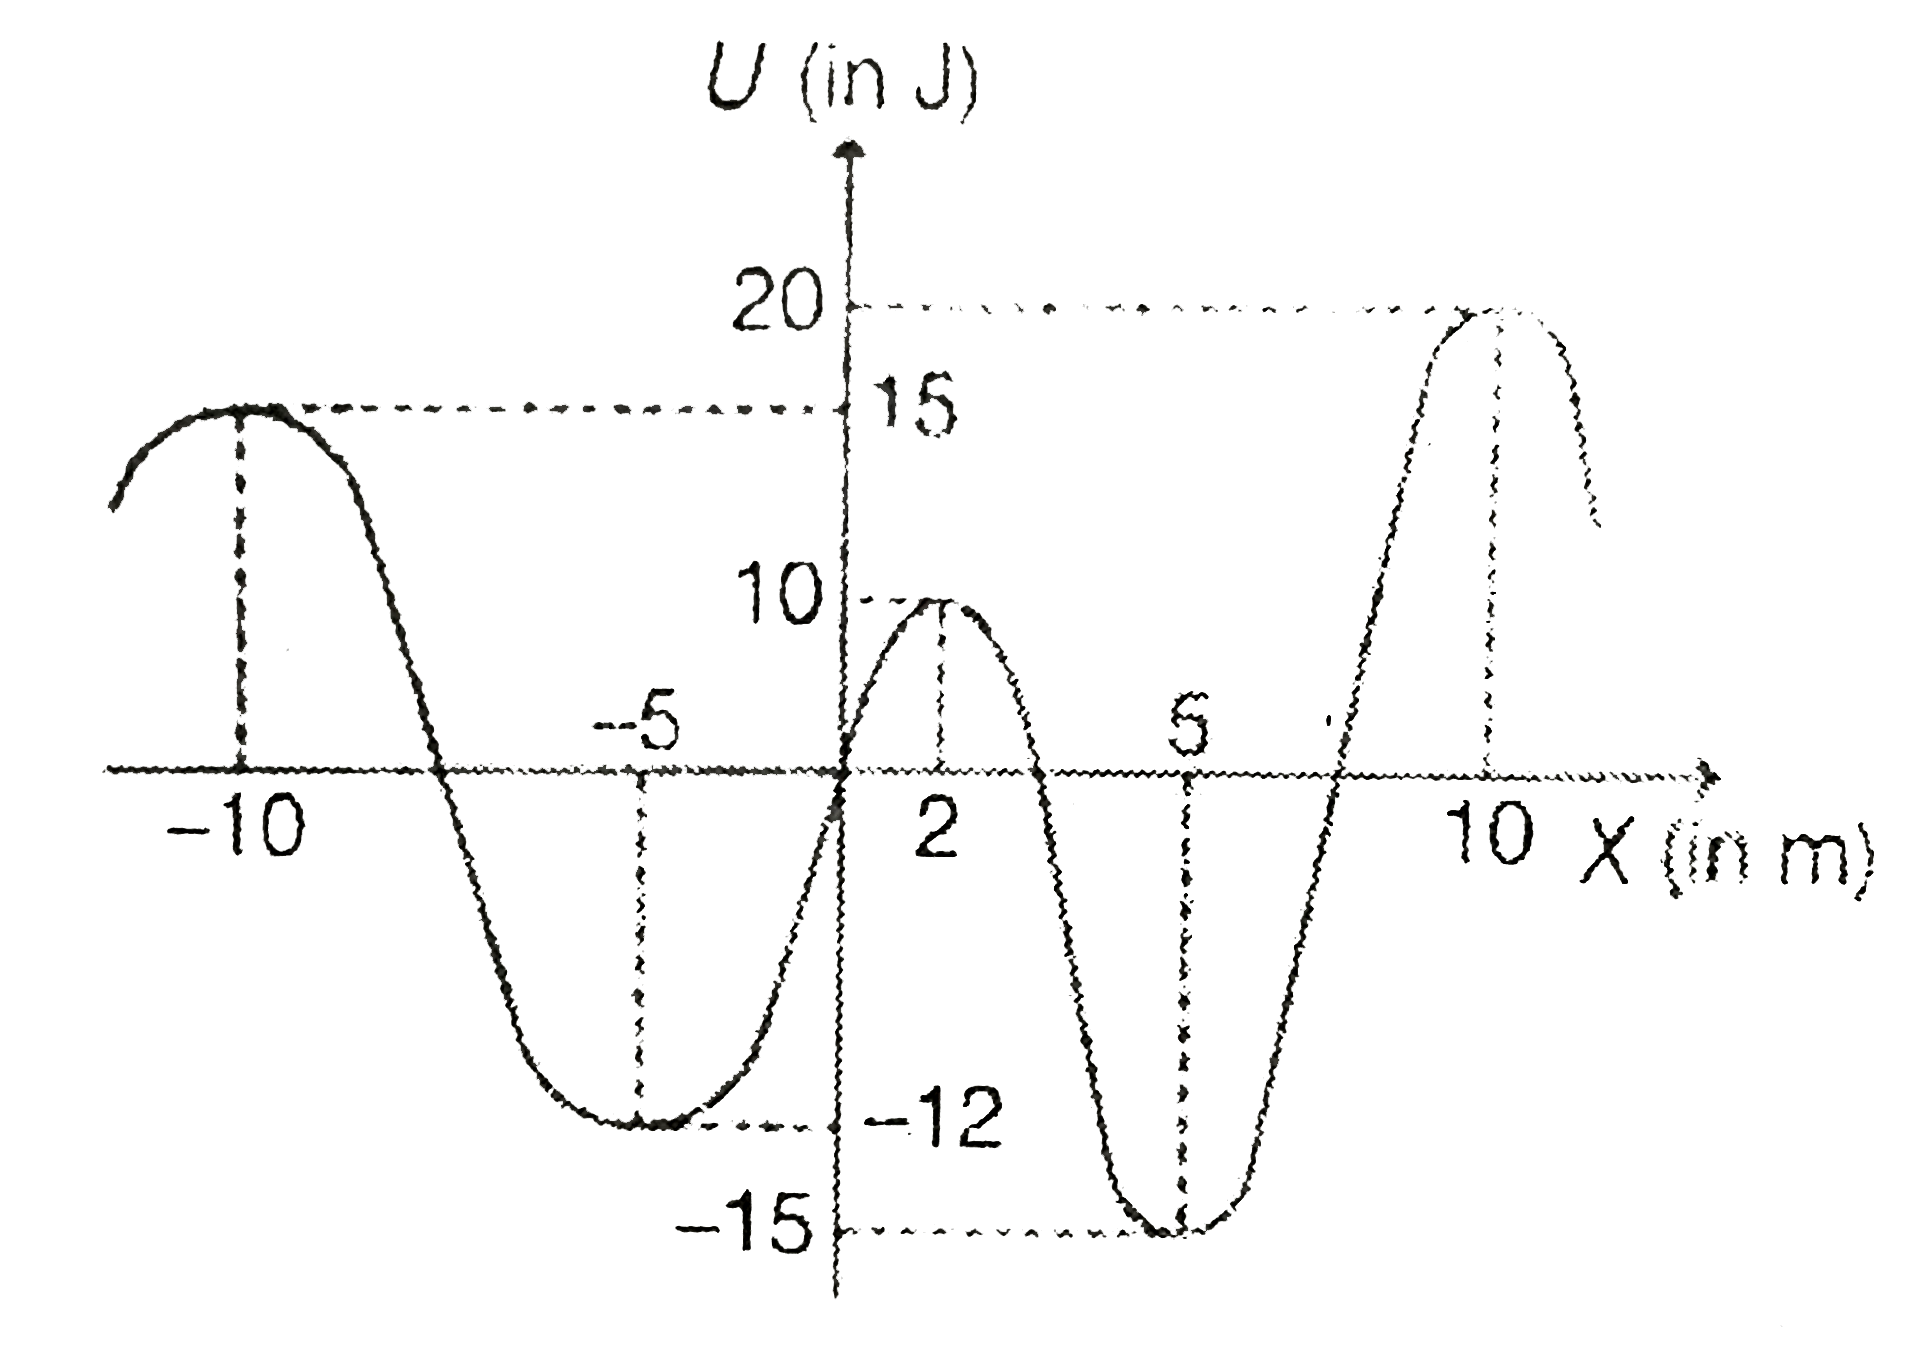 In the figure, the variation of potential energy of a particle of mass m = 2kg is represented with respect to its x-coordinate. The particle moves under the effect of this conservative force along the X-axis.        If the particle is released at the origin, then  
(A)it will move towards positive x-axis 
(B)it will move towards negative x-axis 
(C)it will remain stationary at the origin  
(D)Either of (a) or (b)